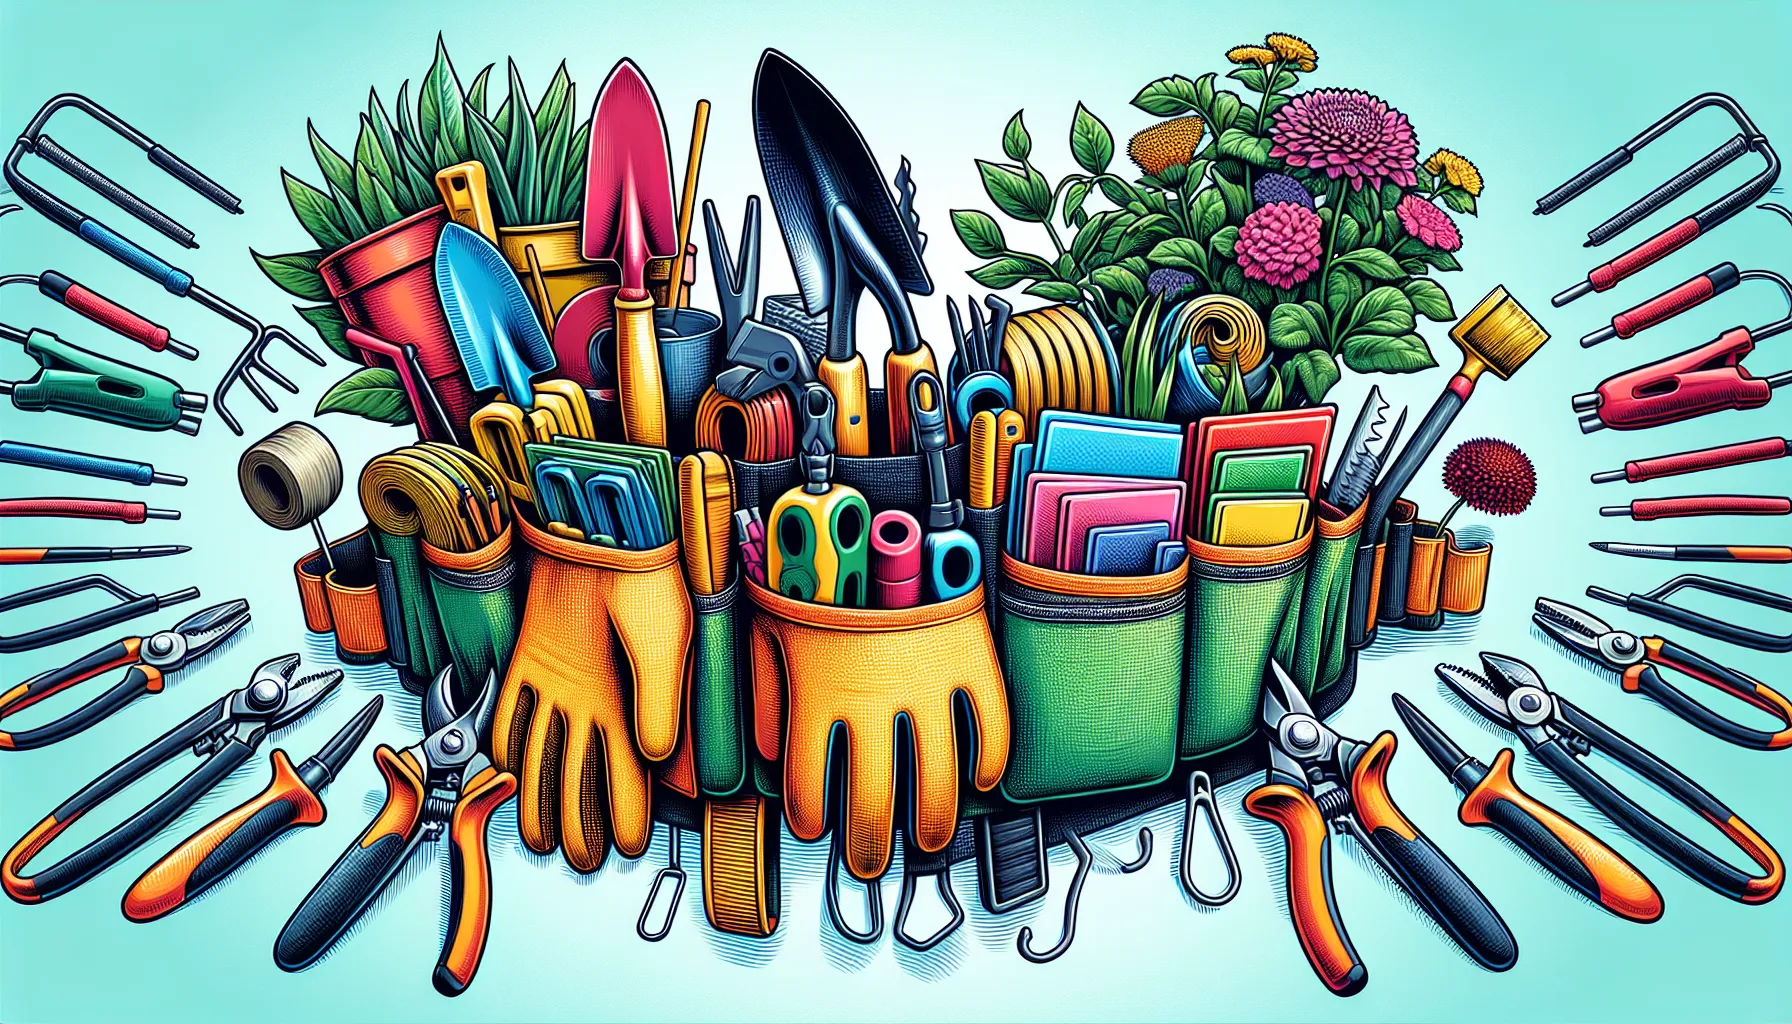 A colorful illustrated array of gardening tools organized in and around a garden tool belt with flowers in the background.